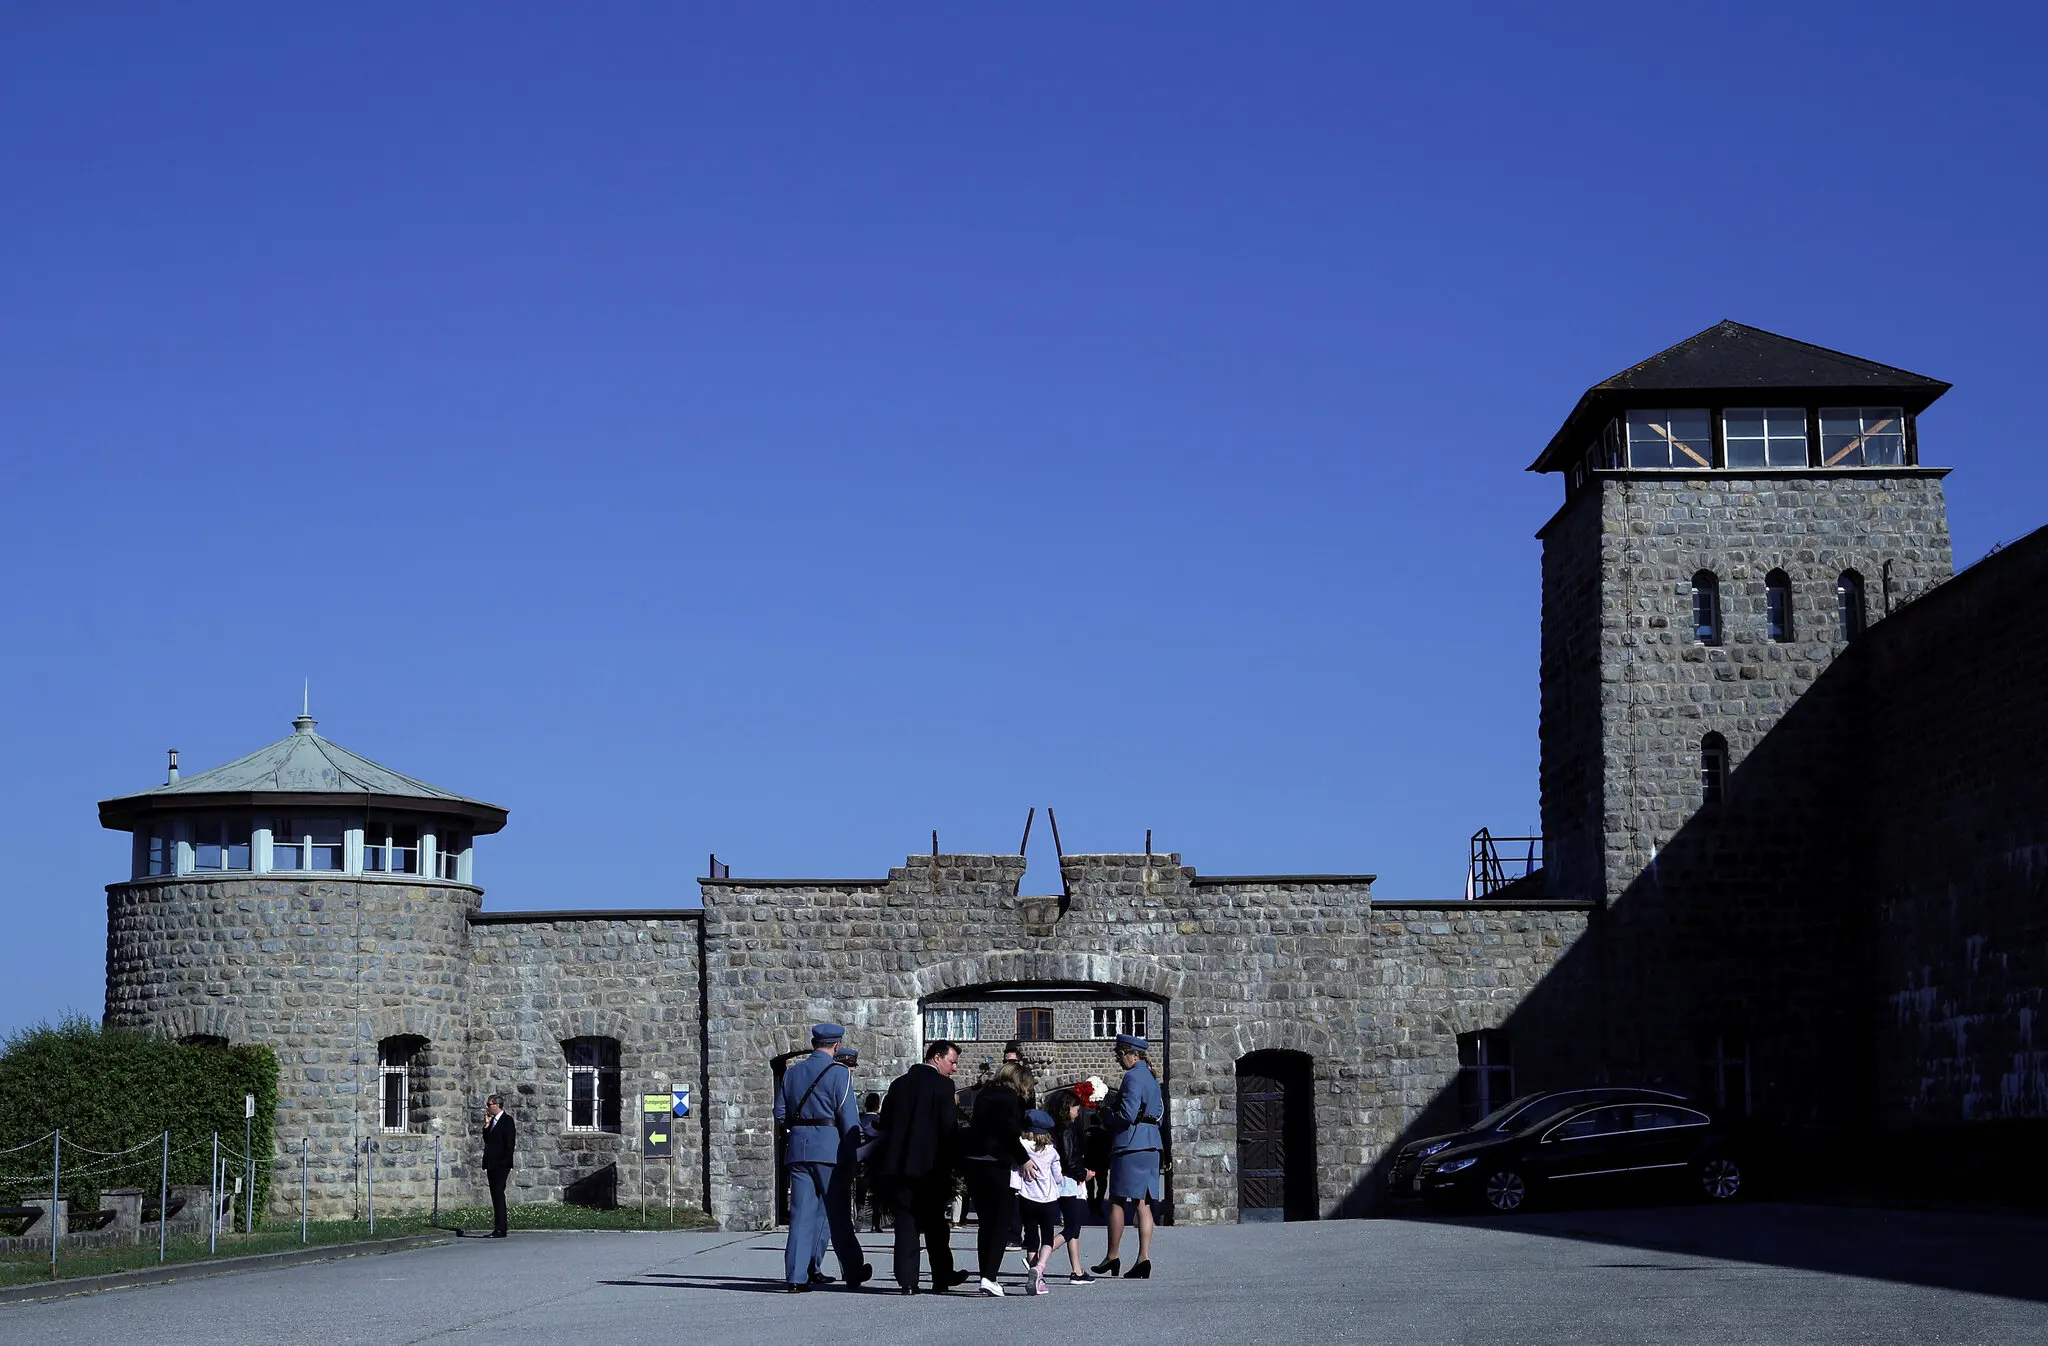 Visiting The Mauthausen Concentration Camp in Austria